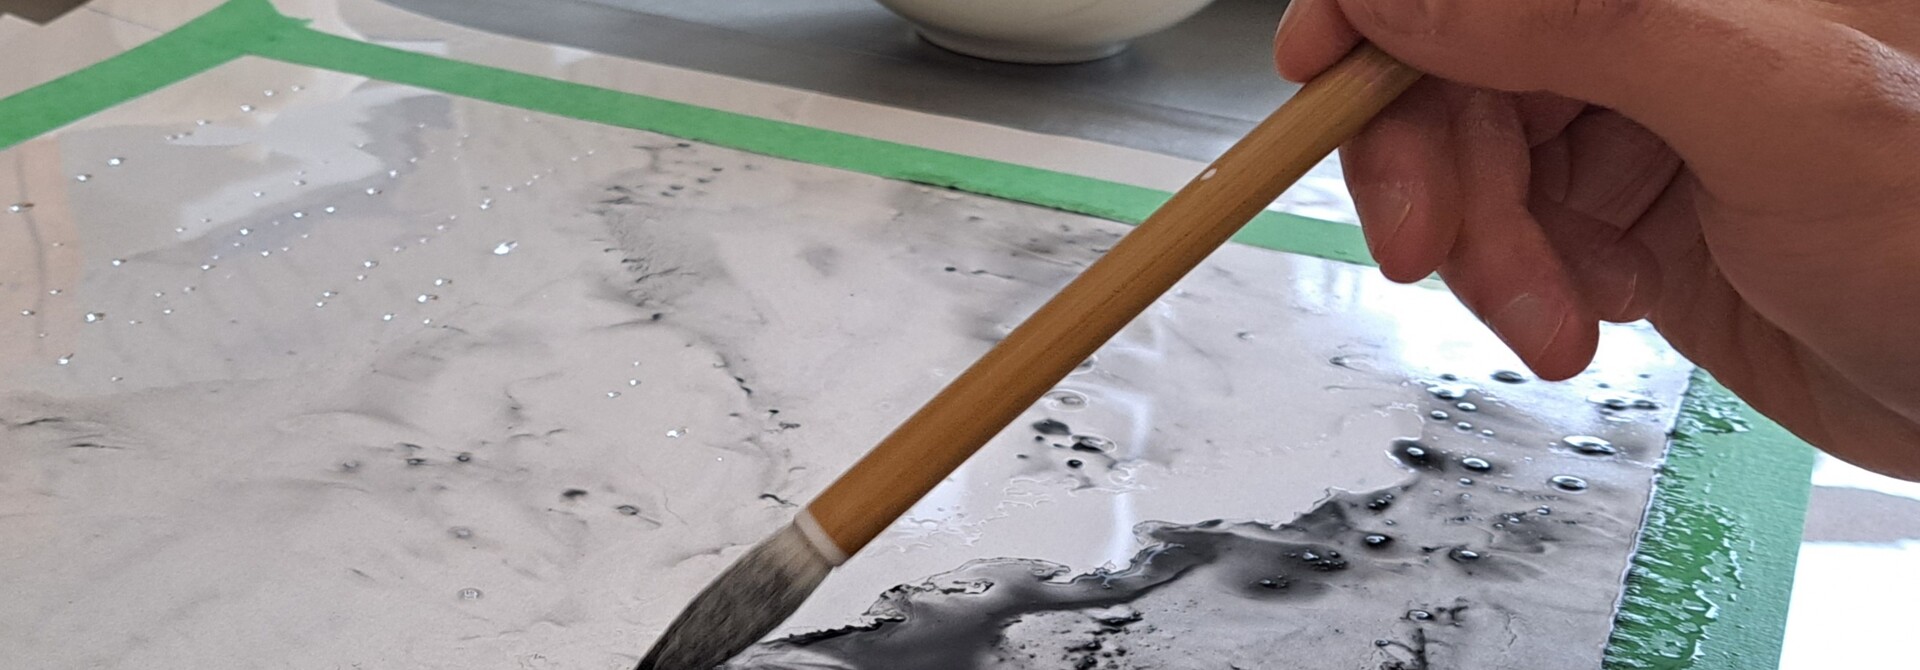 Plate Lithography Workshop - Toner Washes l Saturdays in July